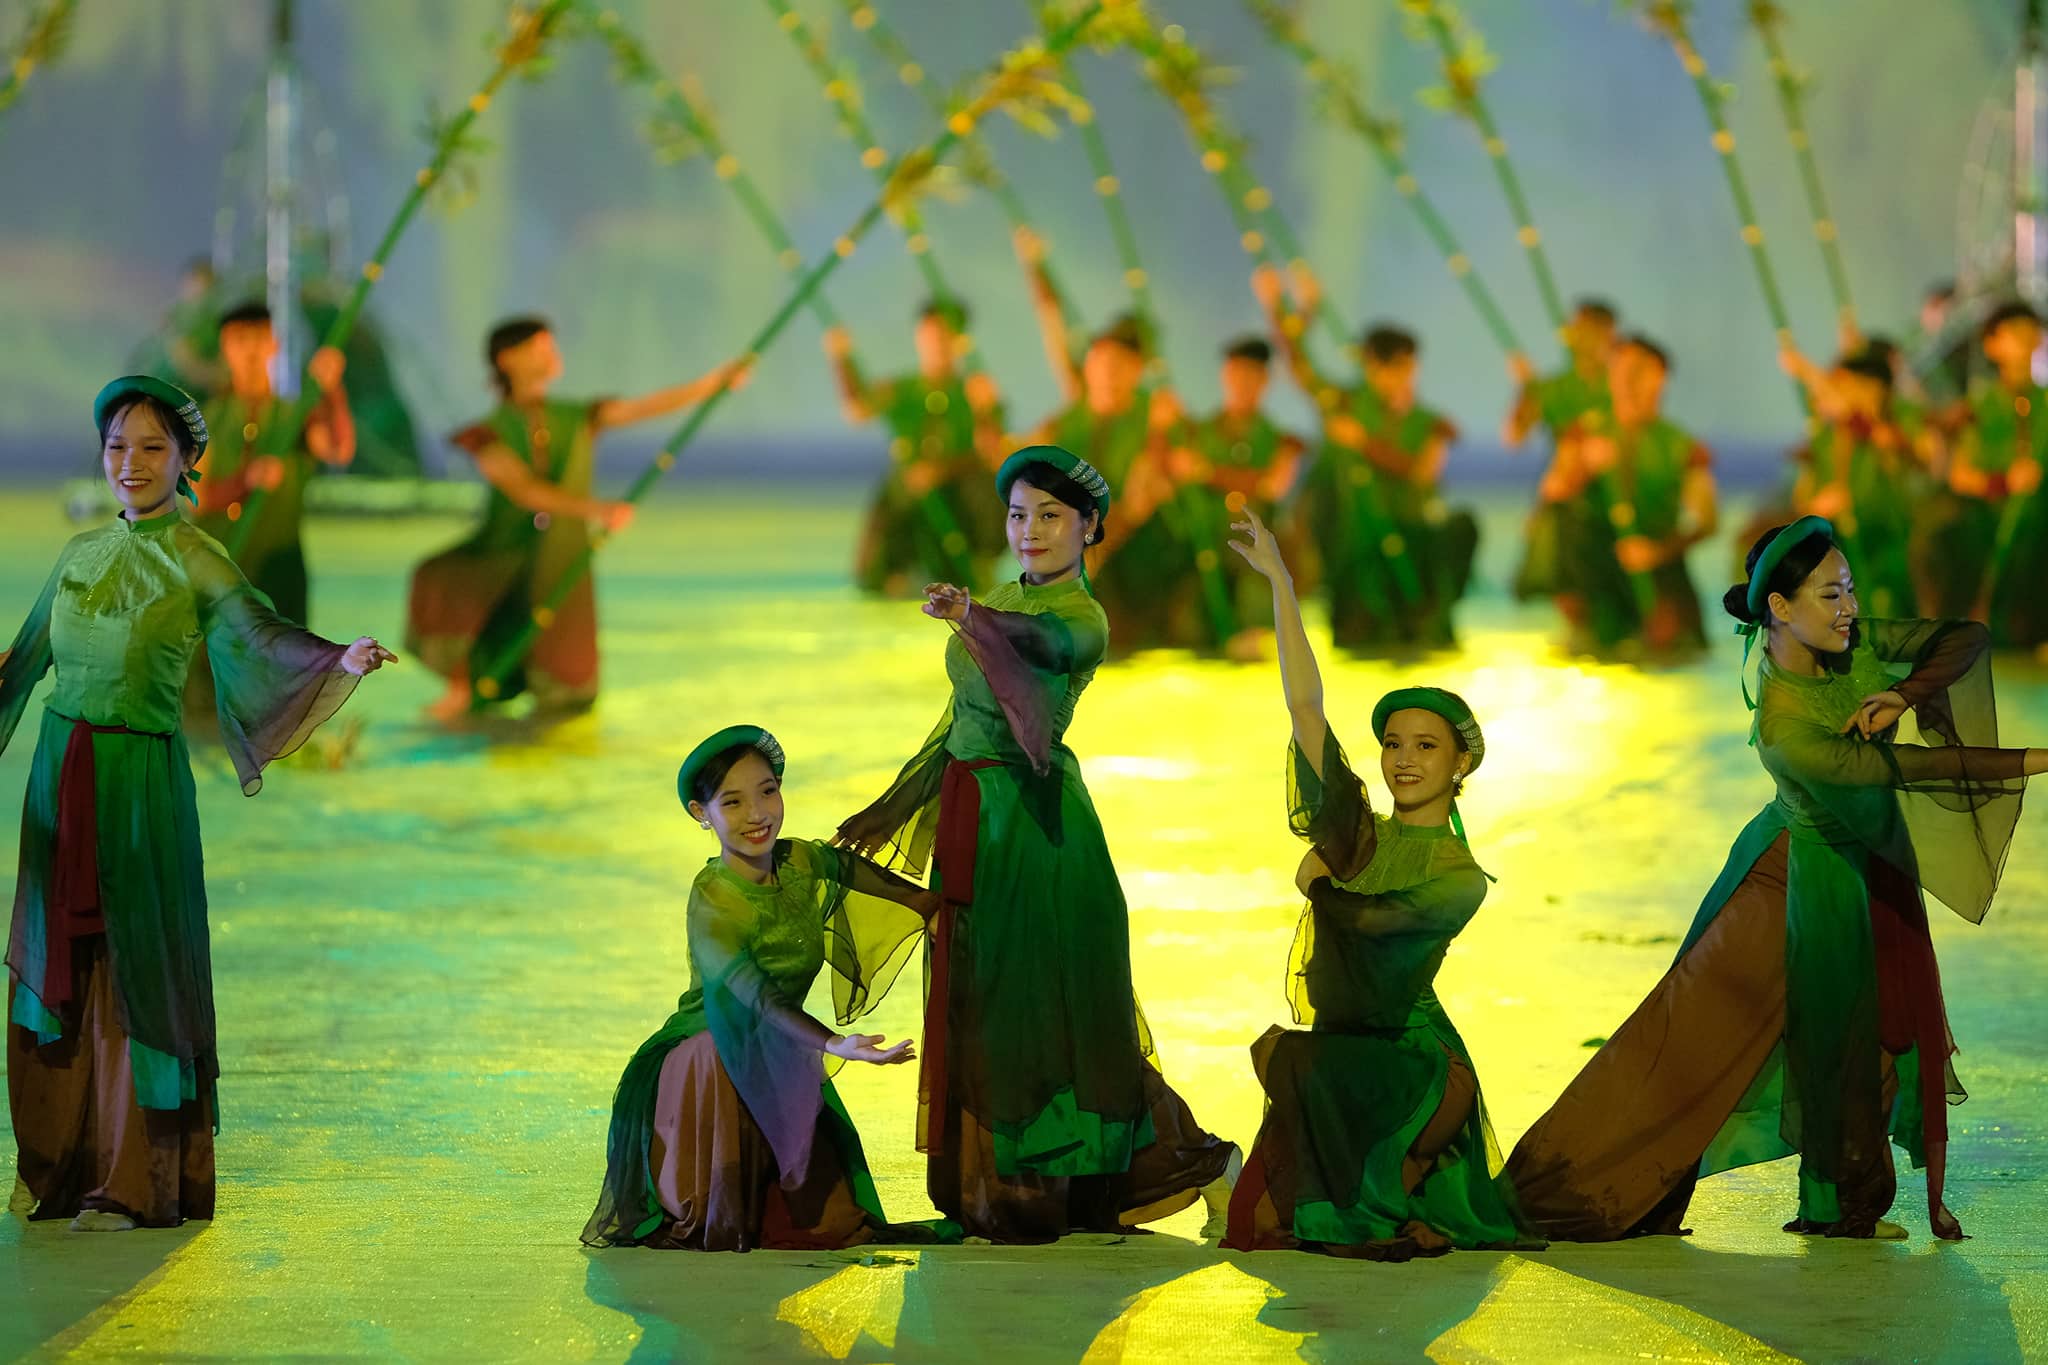 Artists demonstrate a performance during the opening ceremony of the 31st Southeast Asian (SEA) Games at My Dinh National Stadium in Hanoi, Vietnam, May 12, 2022. Photo: Nam Tran / Tuoi Tre